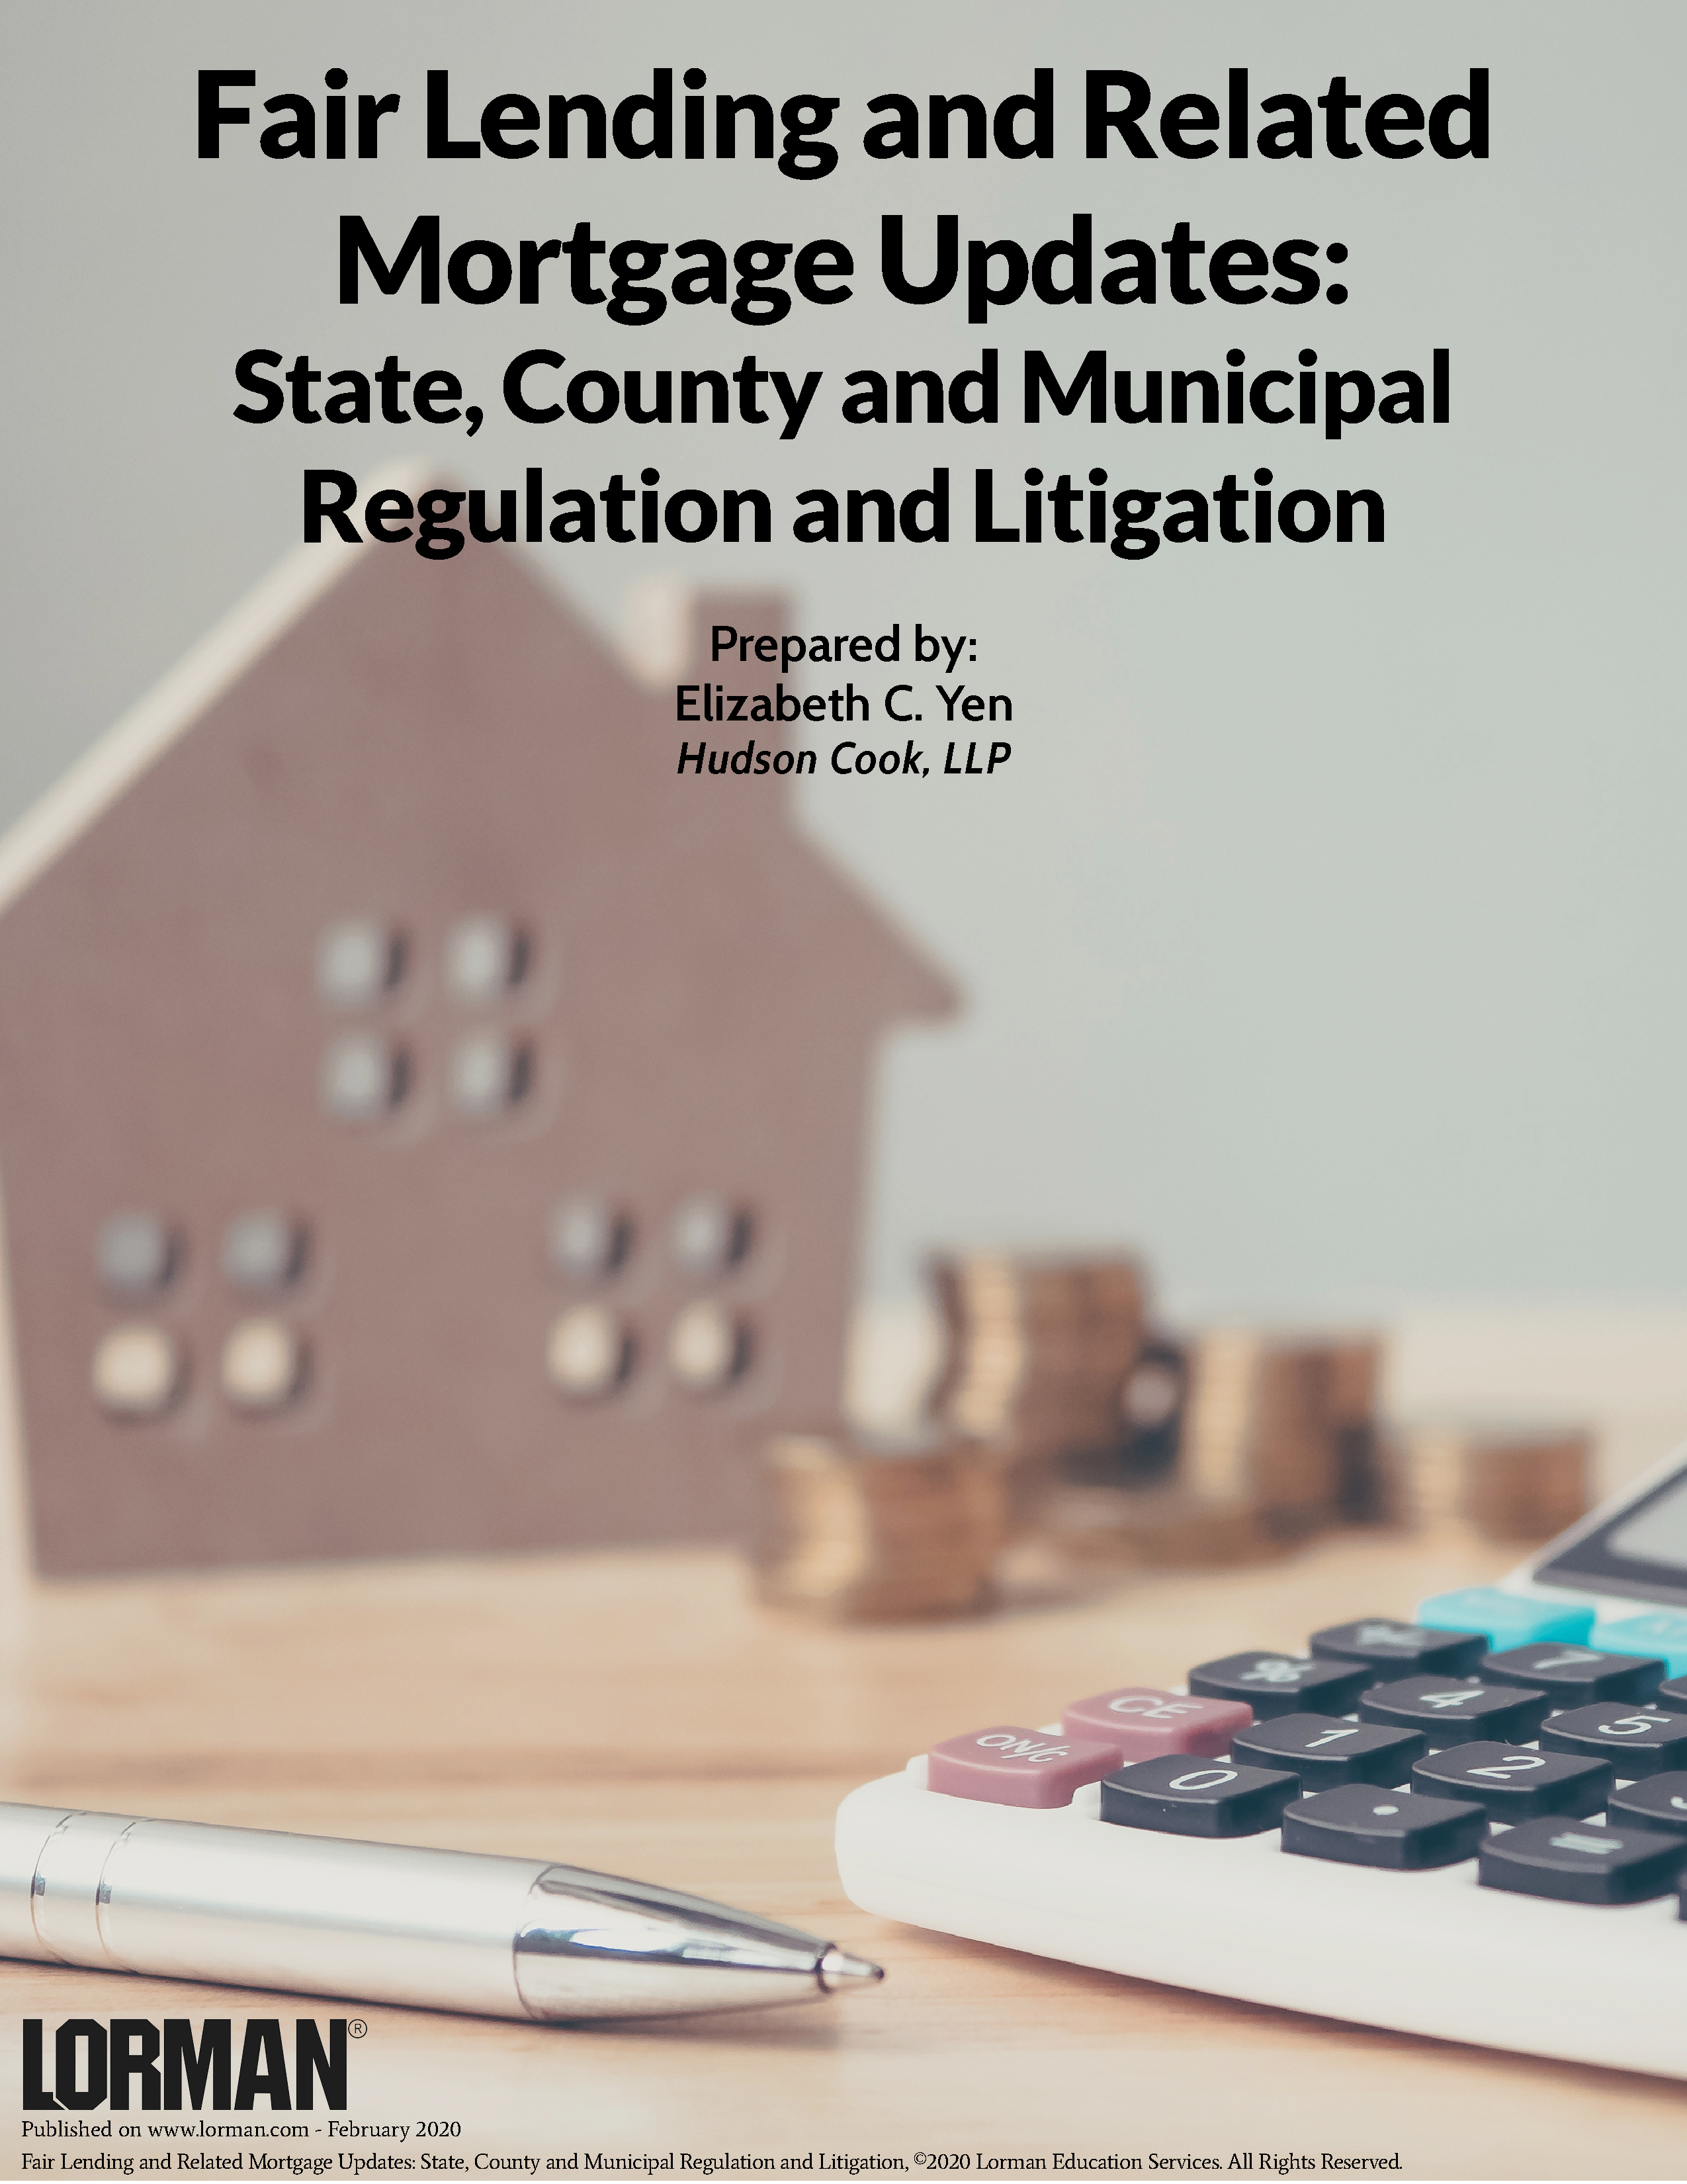 Fair Lending and Related Mortgage Updates: State, County and Municipal Regulation and Litigation